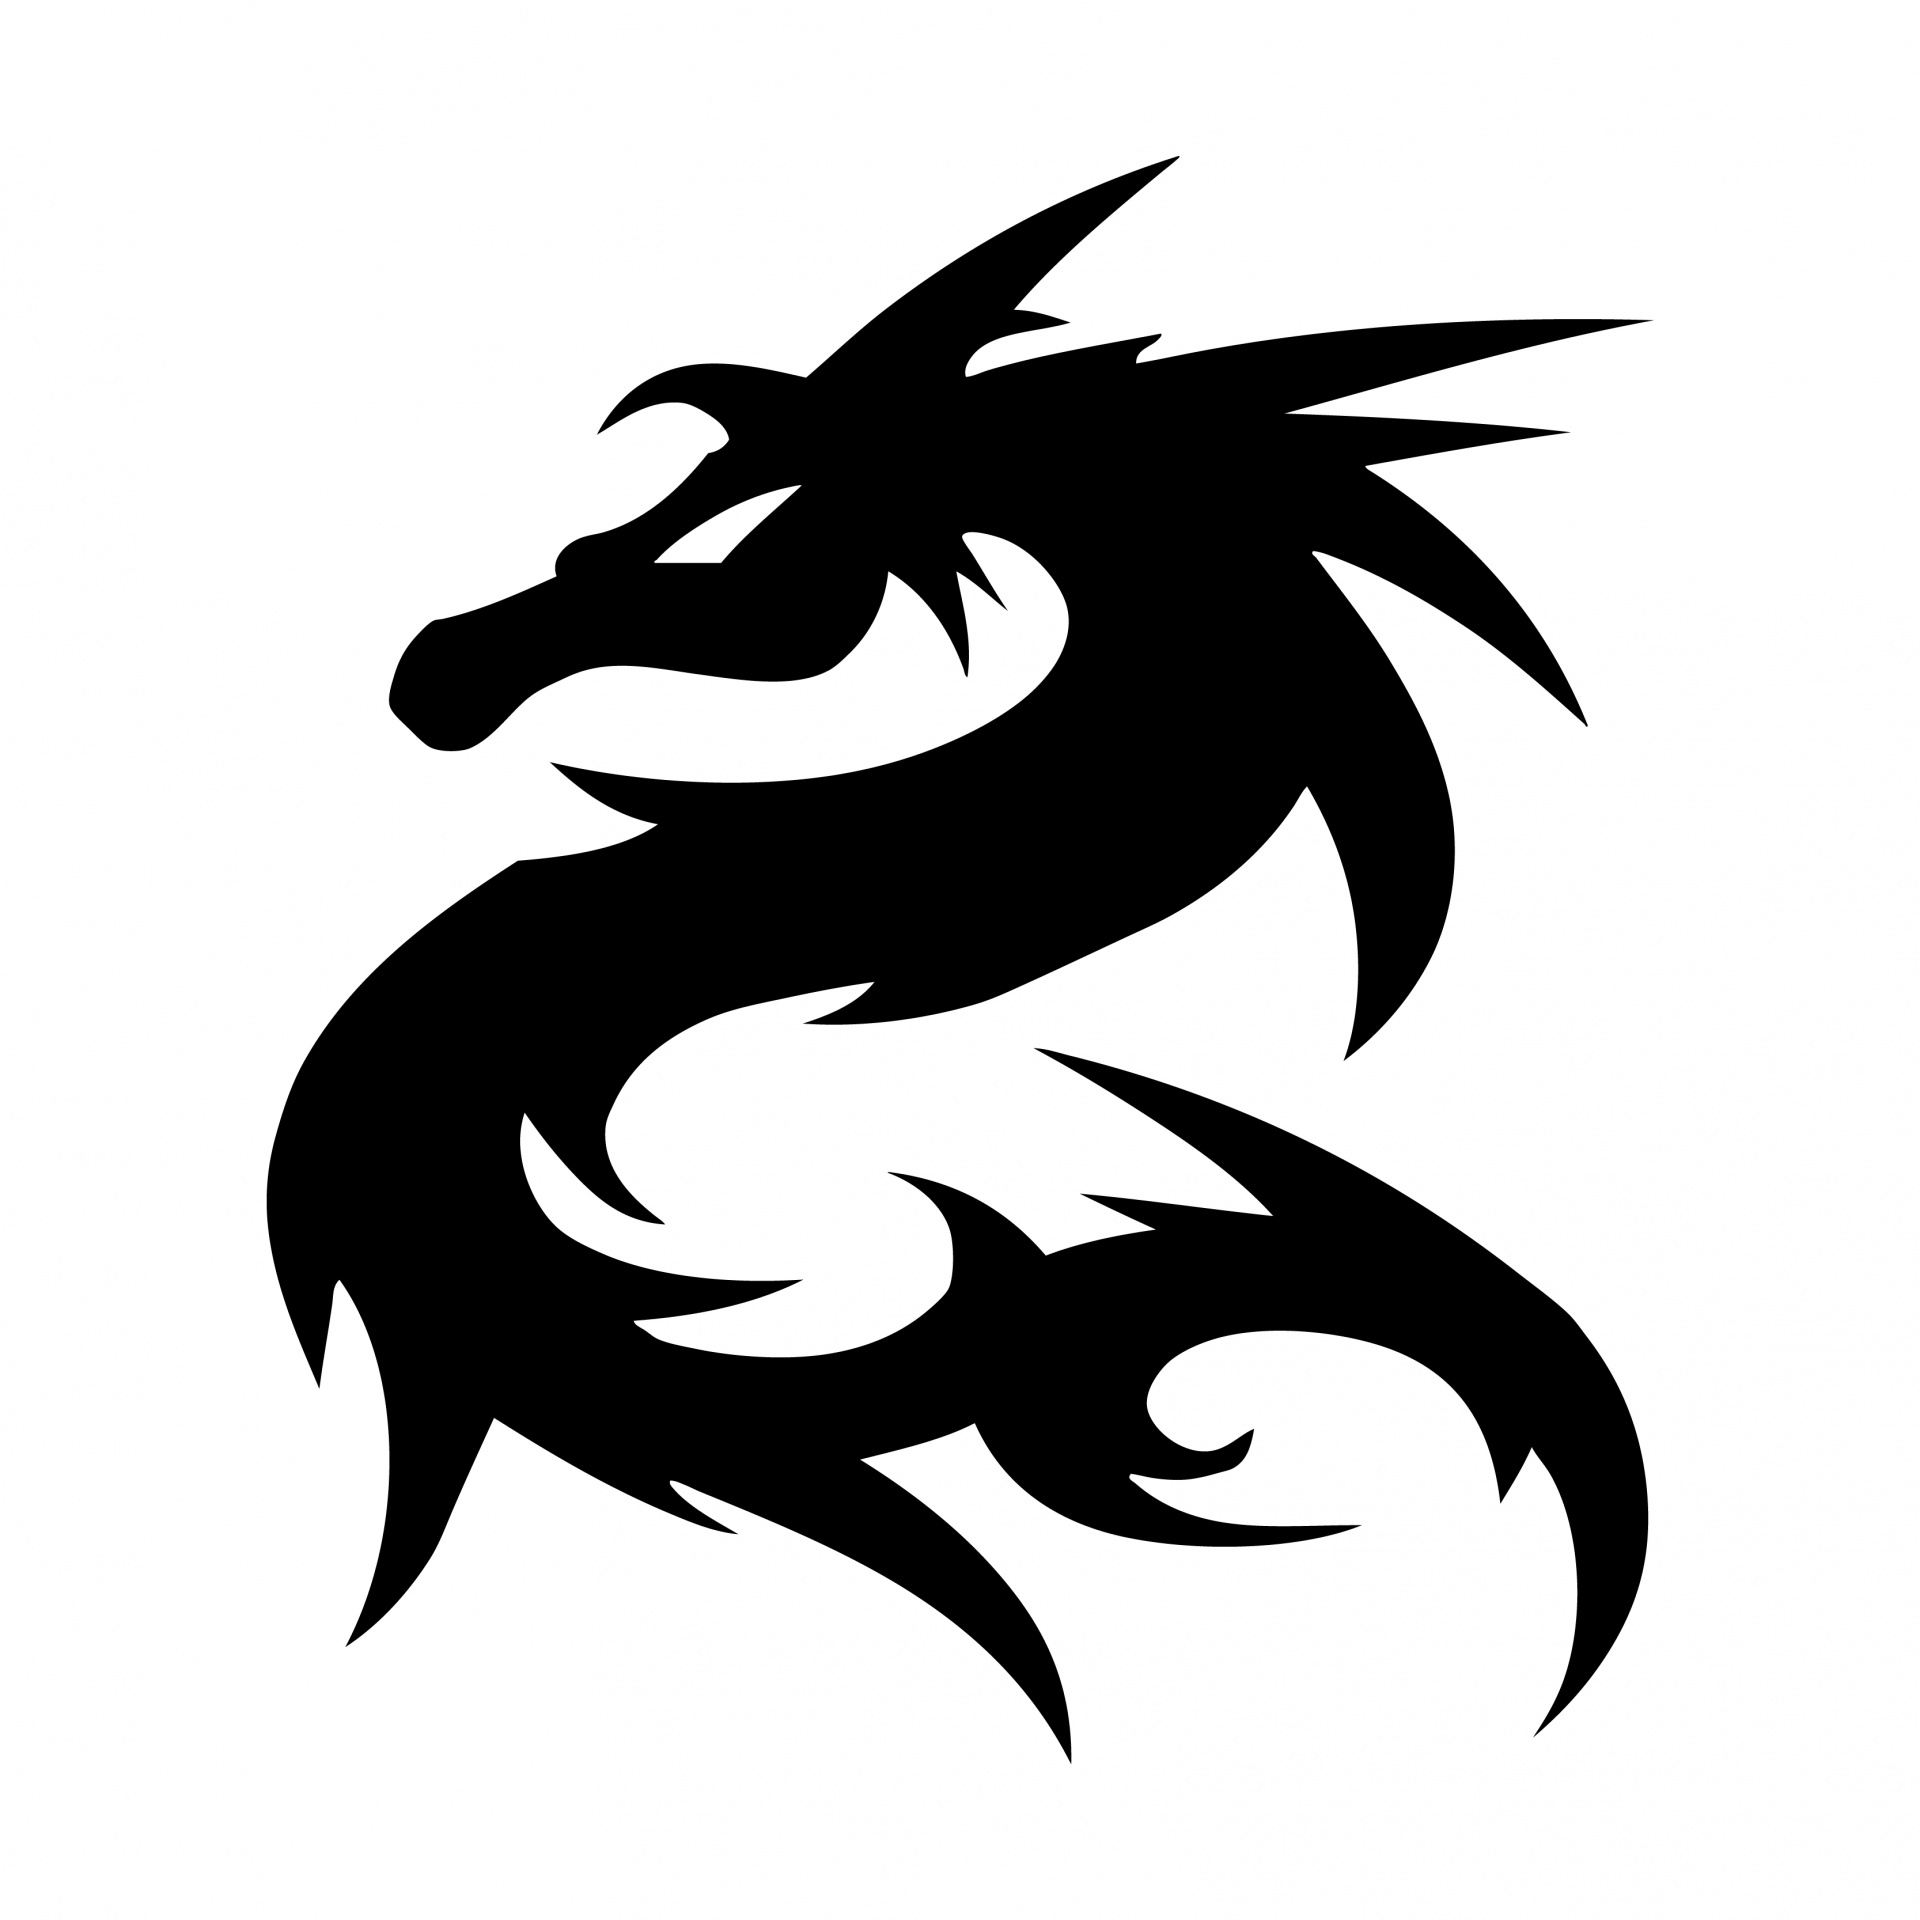 Black silhouette of a tribal dragon as business logo or symbol